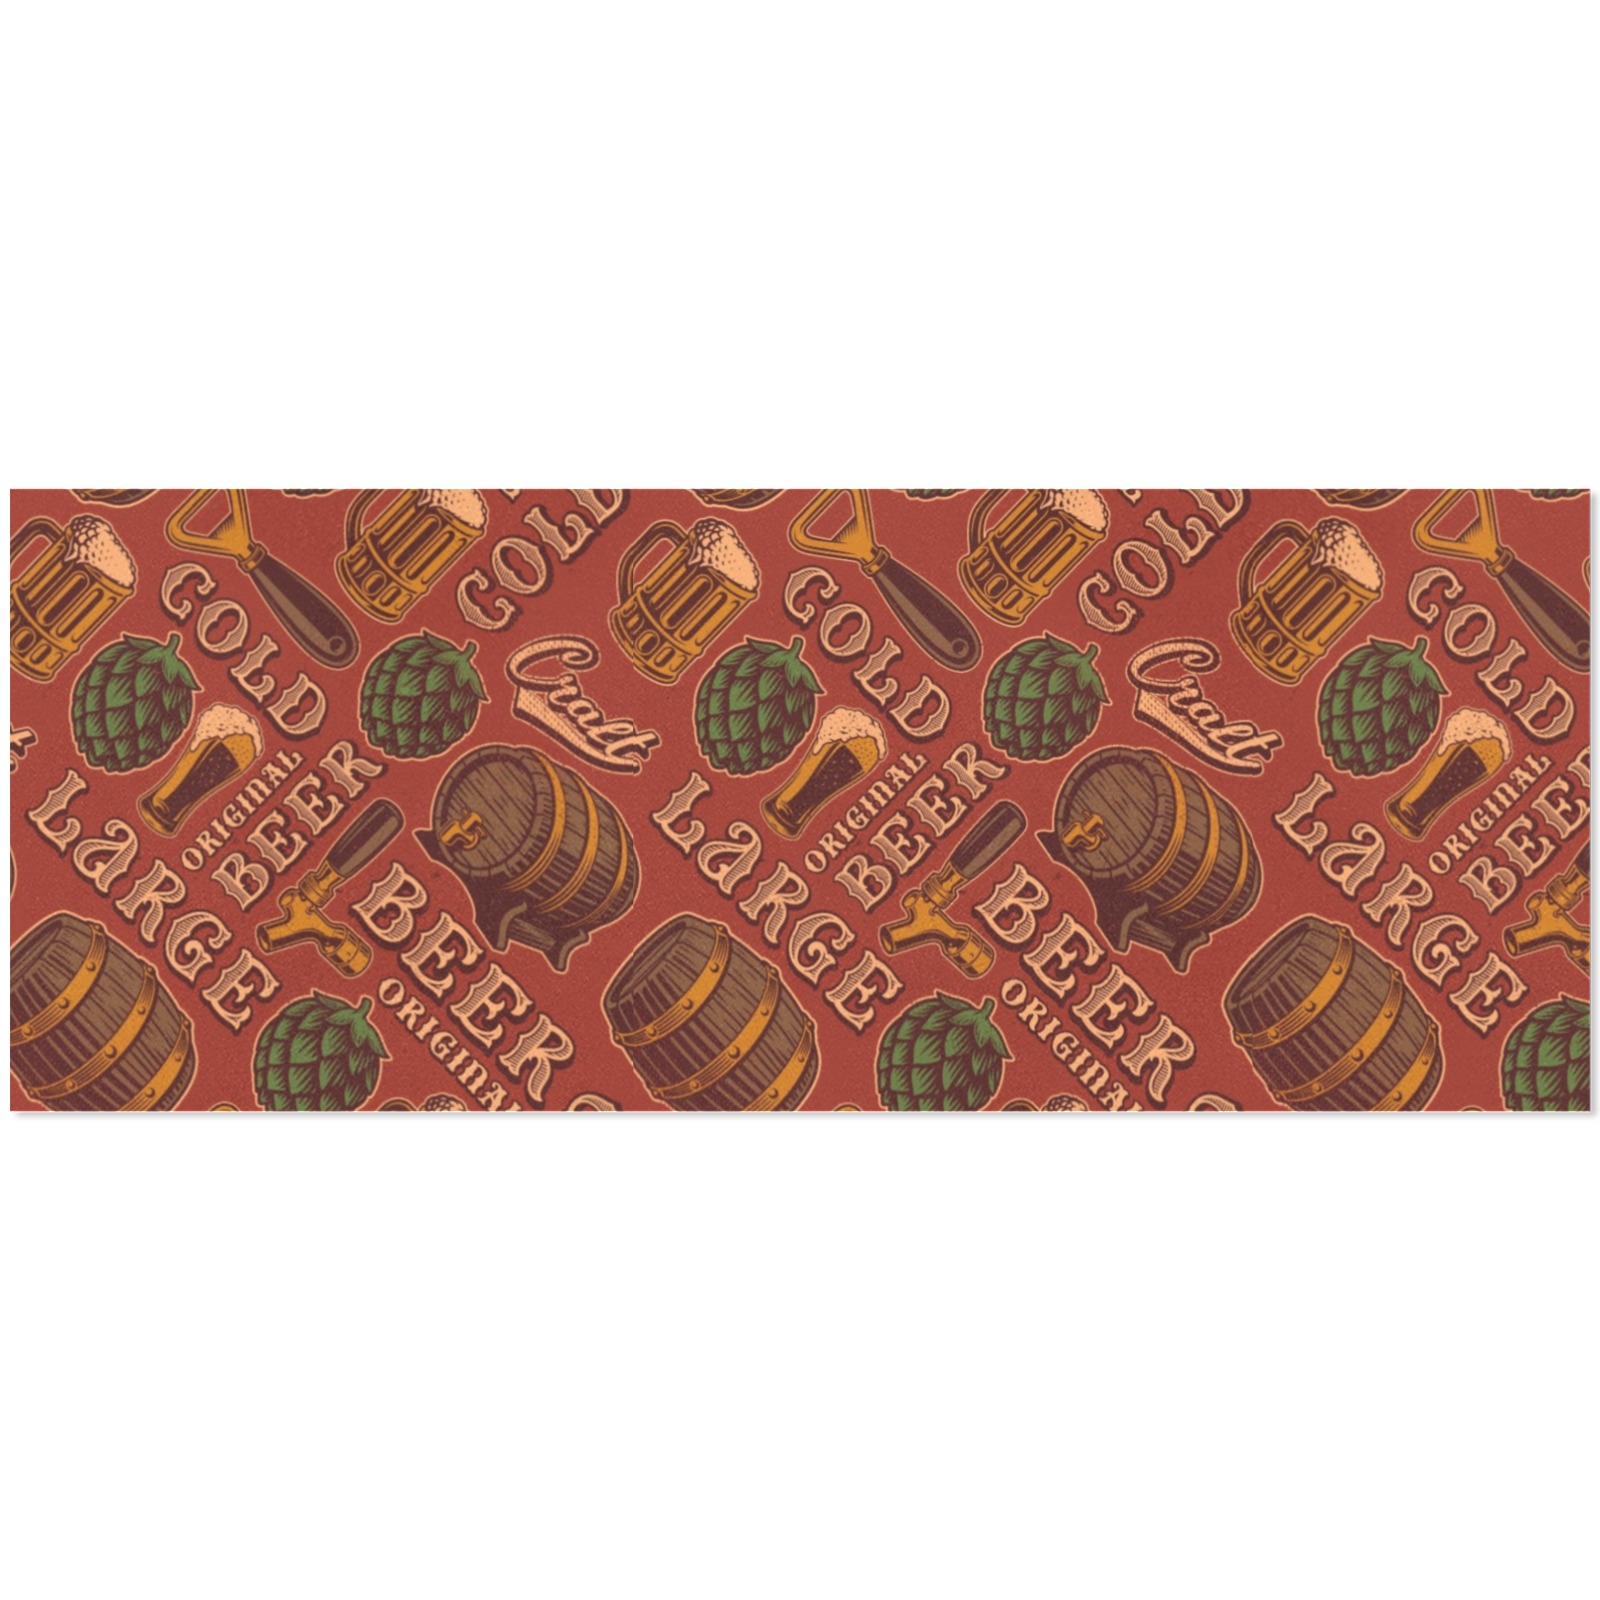 Cold Beer Pattern Gift Wrapping Paper 58"x 23" (1 Roll)